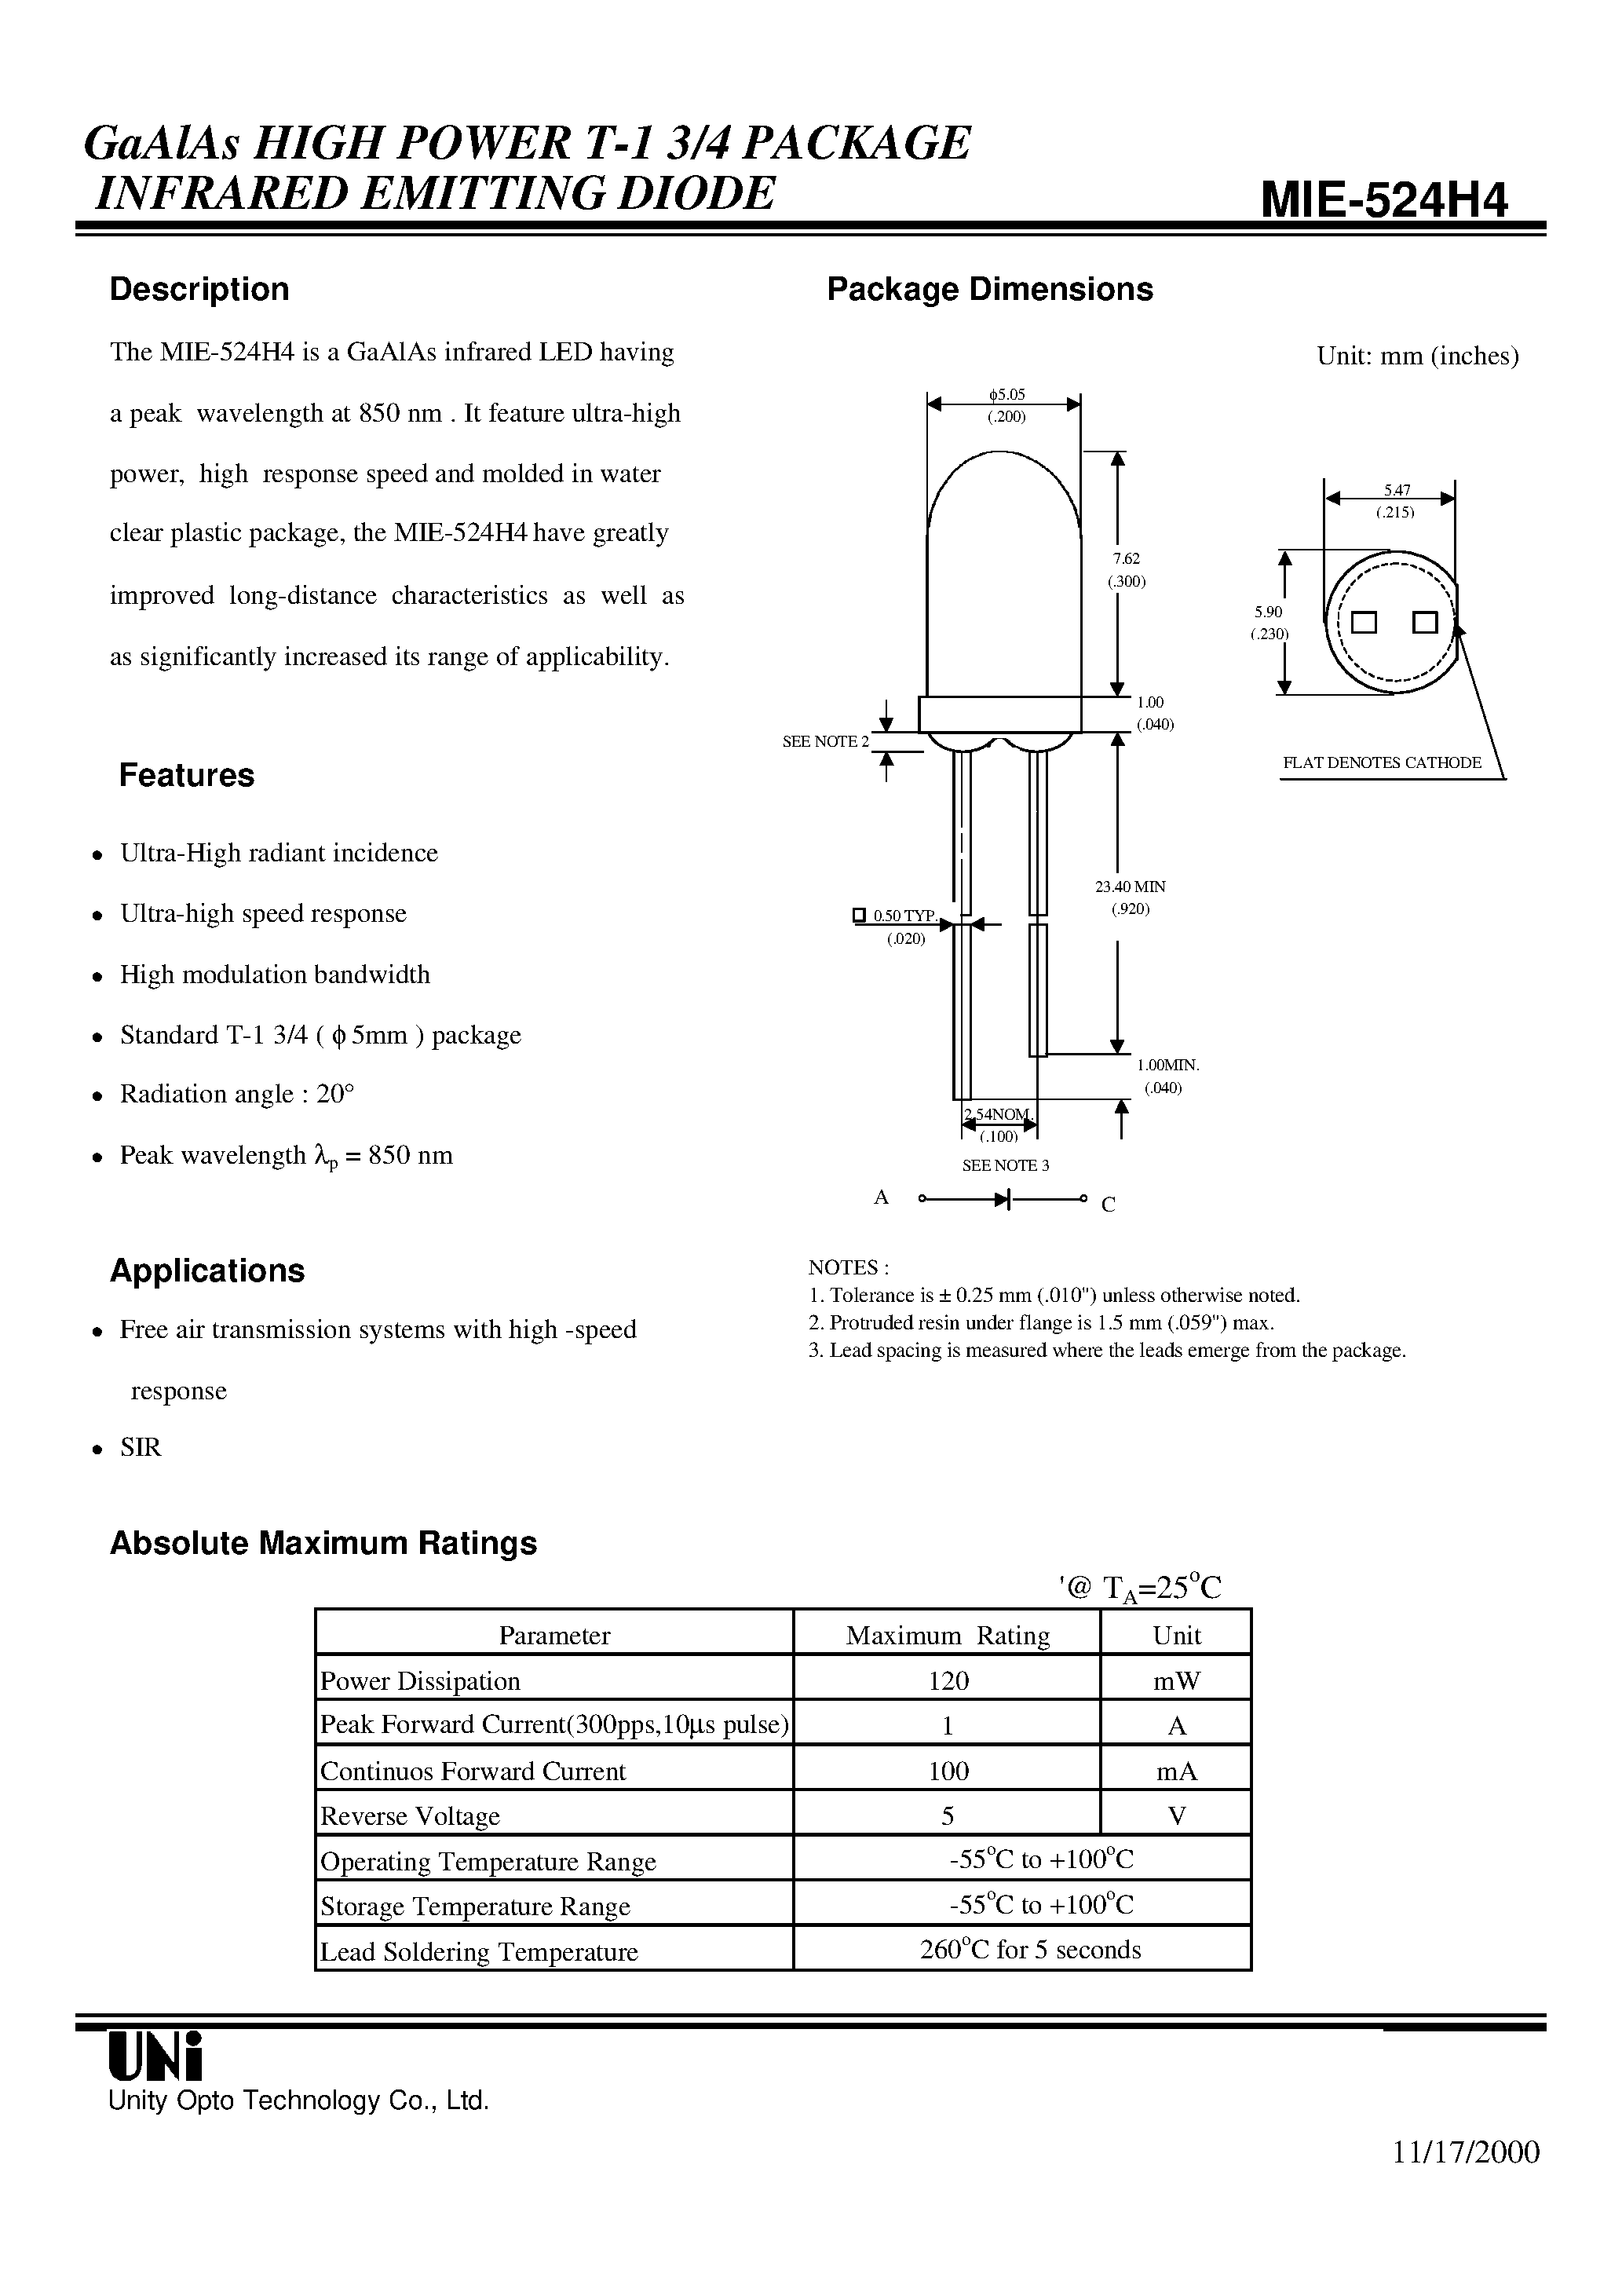 Datasheet MIE-524H4 - GaAlAs HIGH POWER T-1 3/4 PACKAGE INFRARED EMITTING DIODE page 1